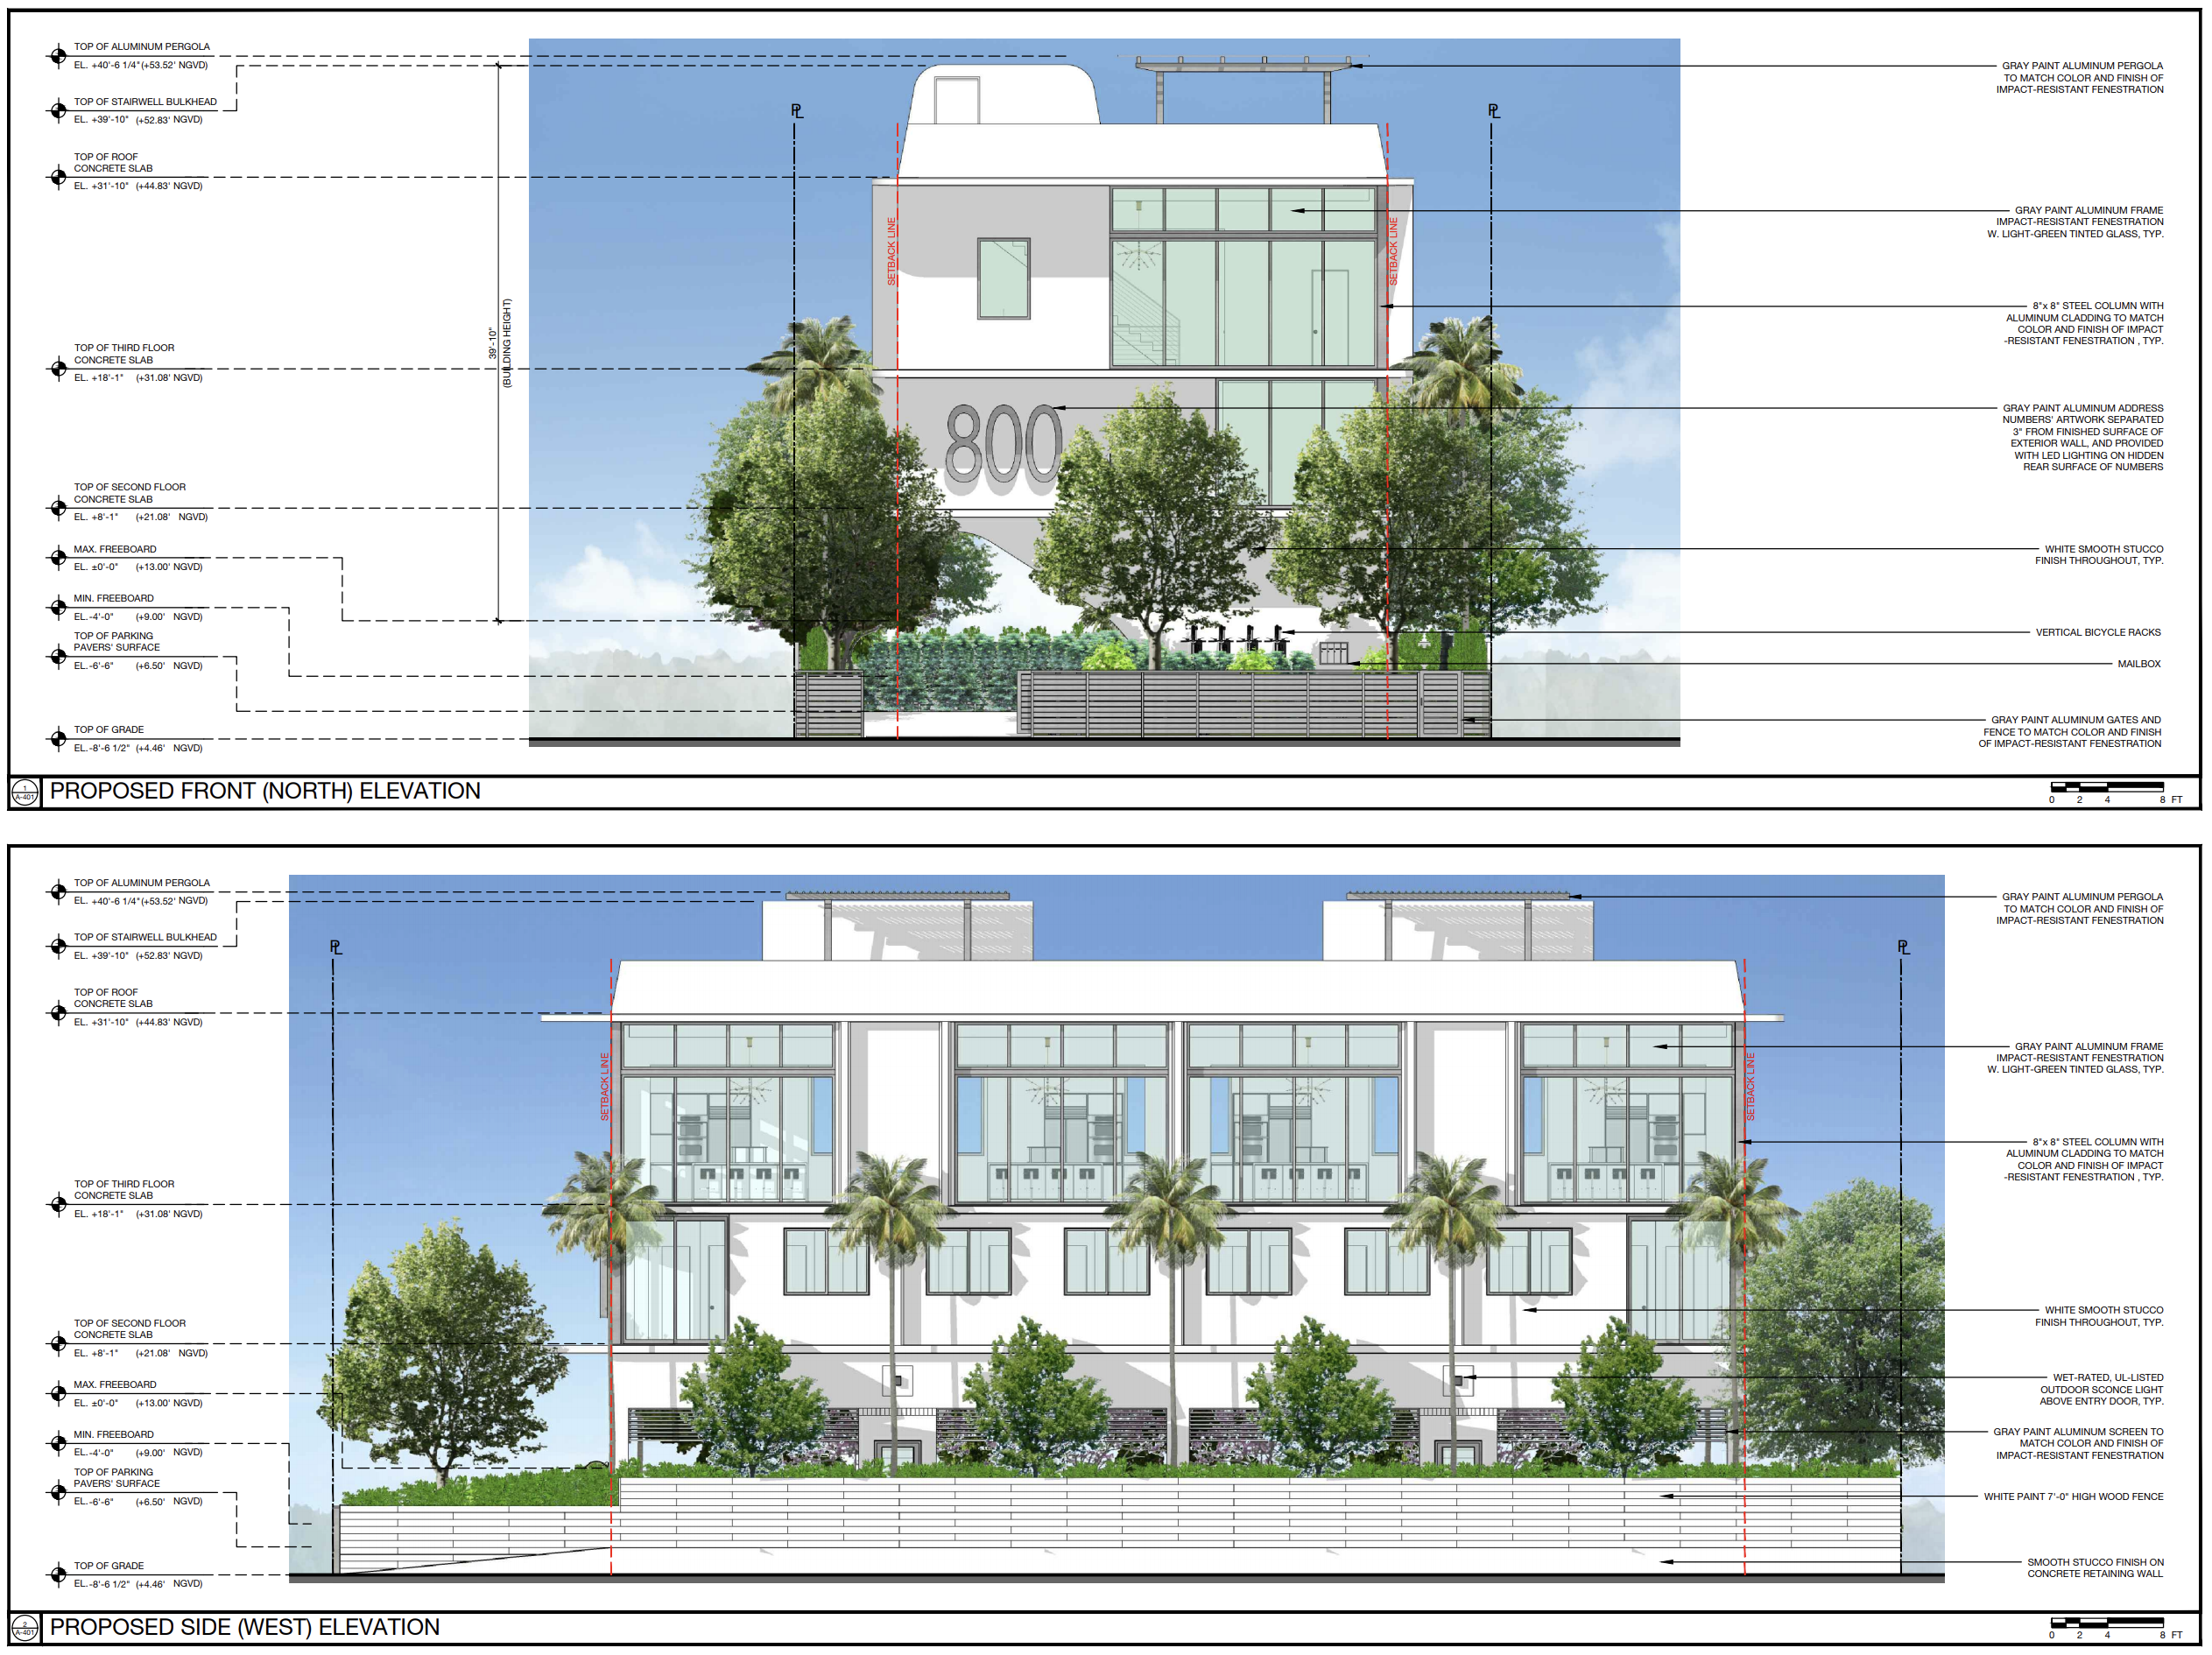 800 84th Street. Courtesy of CDS Architecture and Planning.